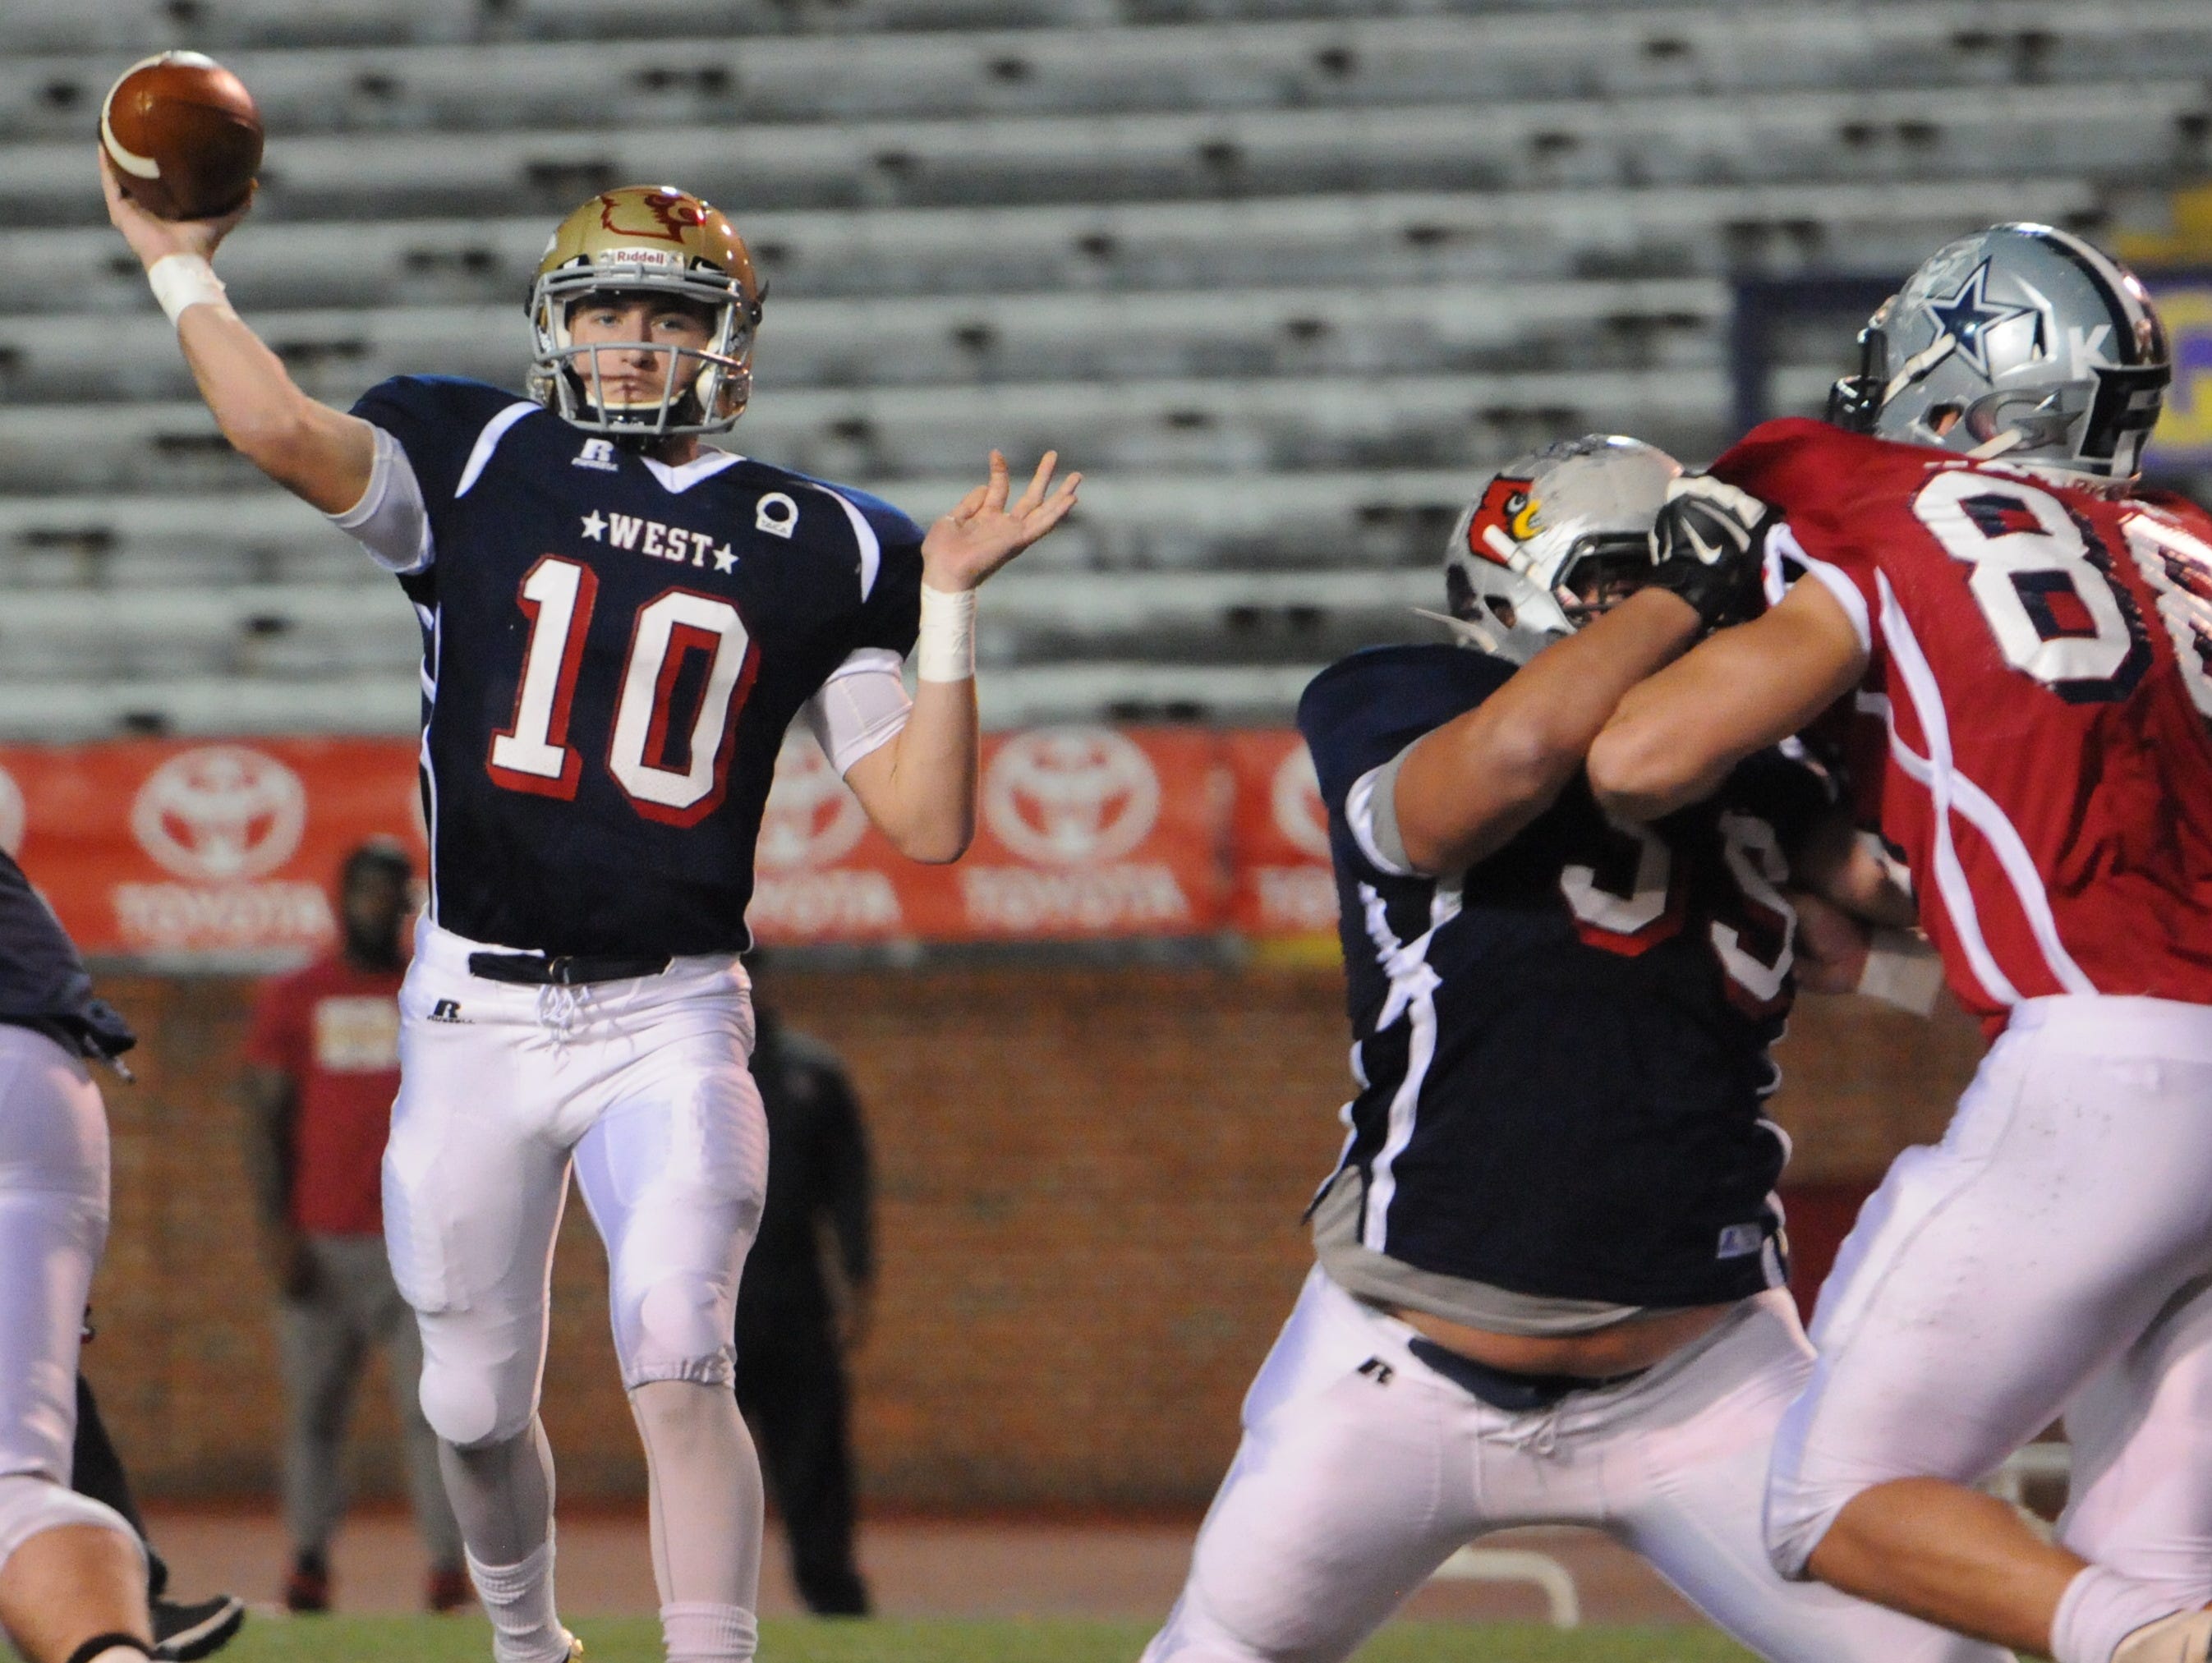 West quarterback Andrew Bunch (Independence) fires a pass during Friday's East-West All-Star Game in Cookeville.